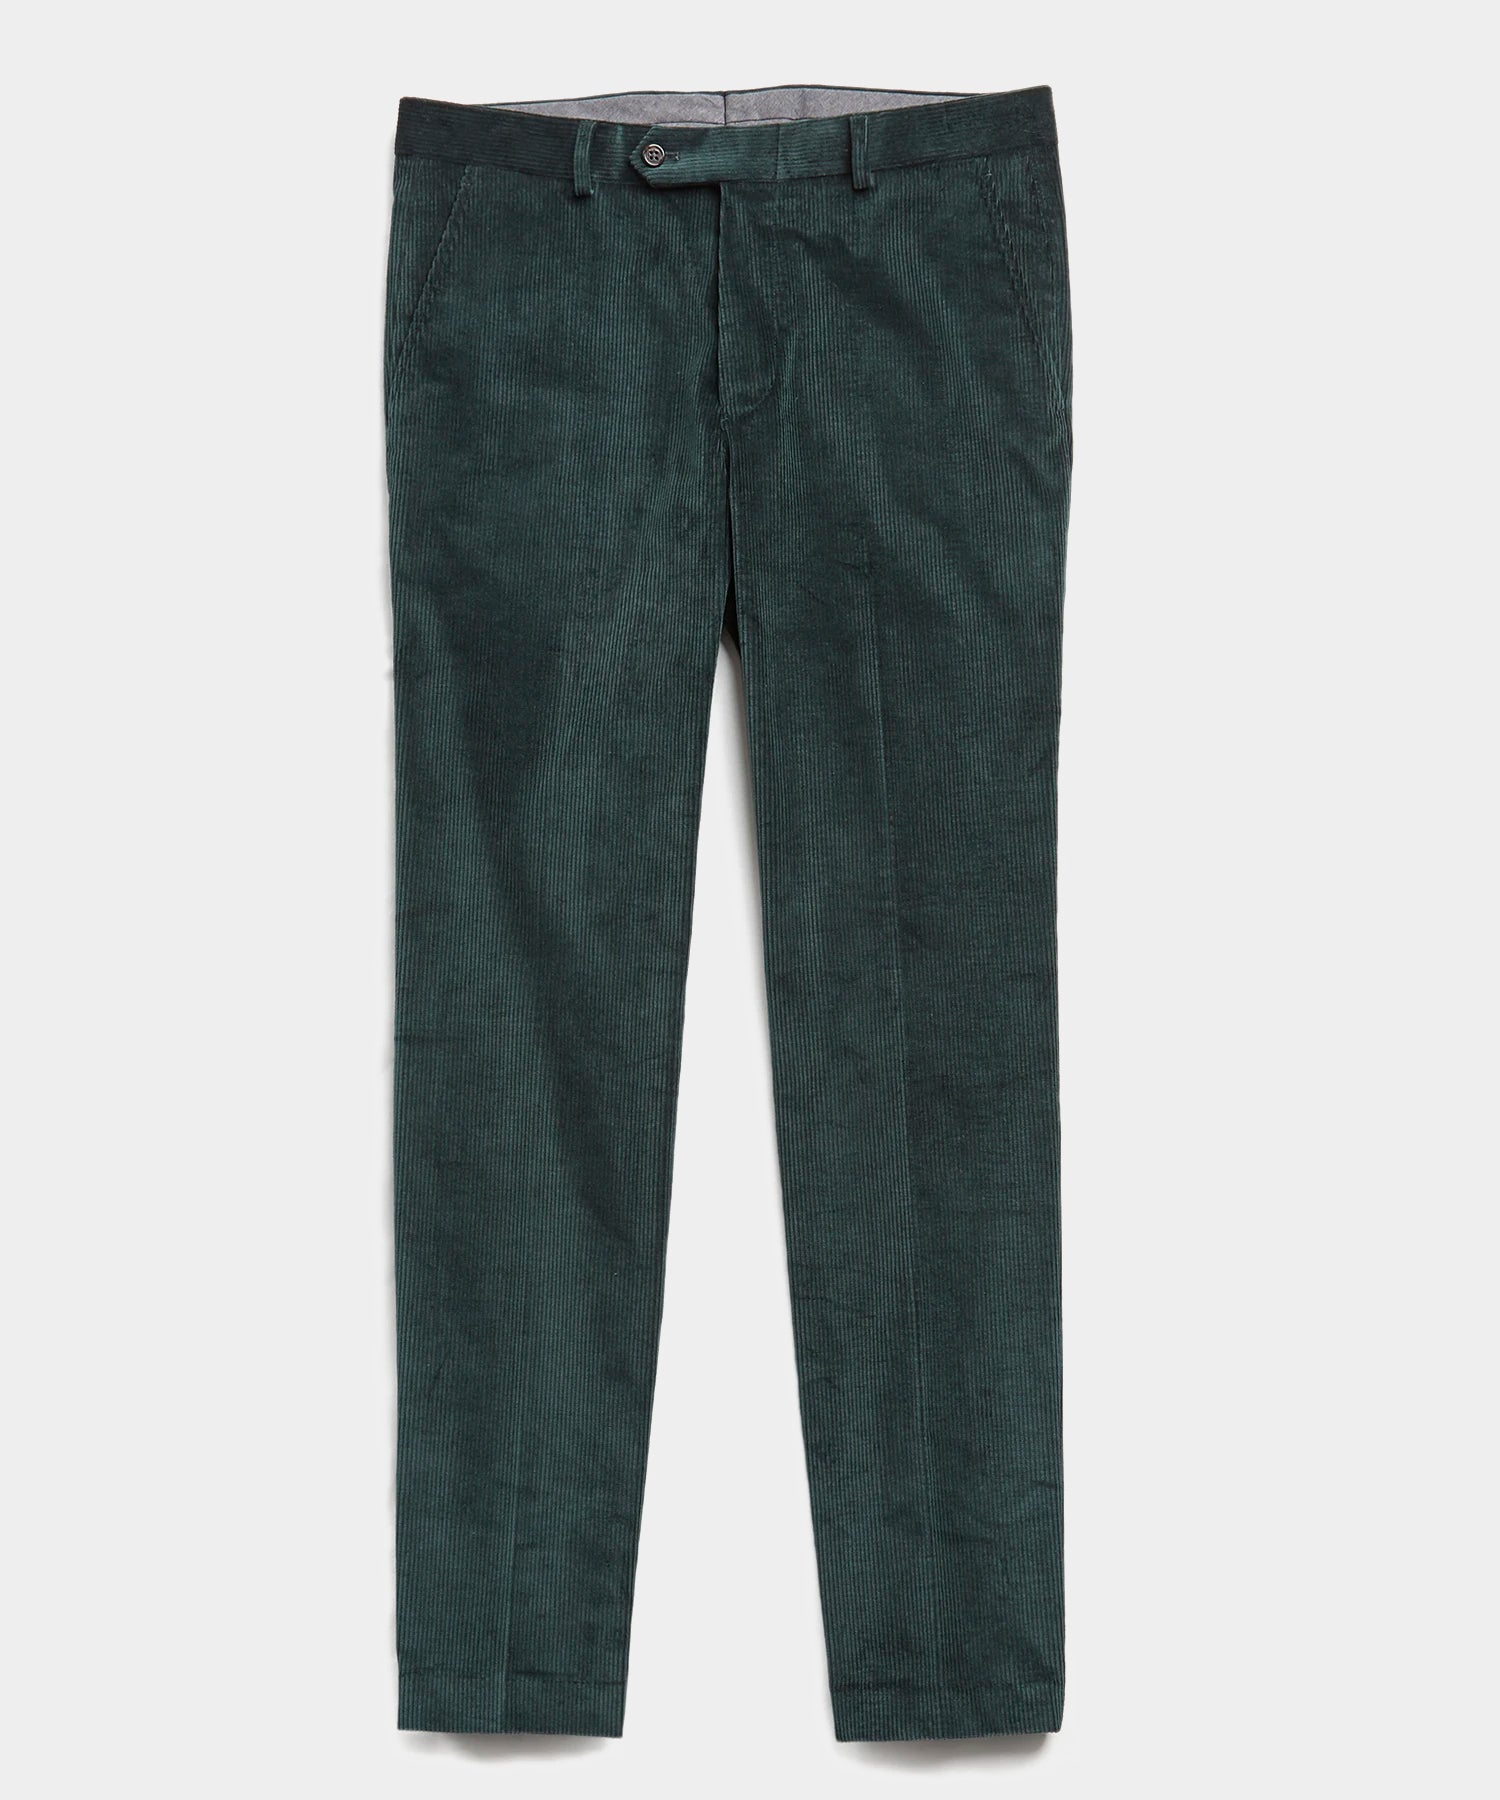 Image of Sutton Corduroy Trouser in Emerald